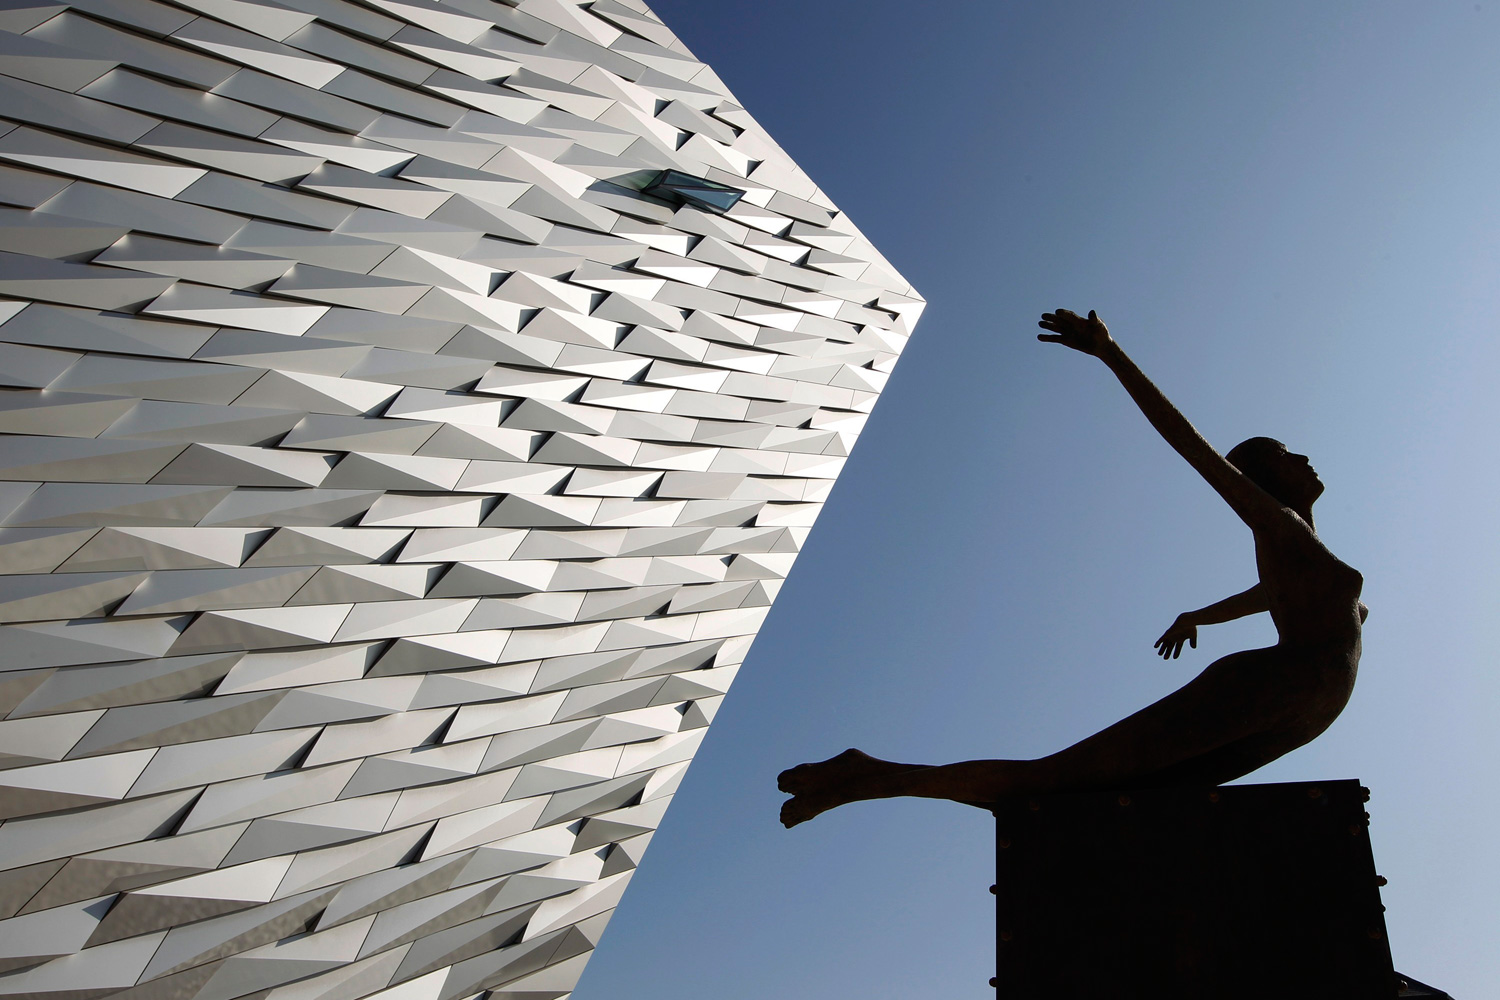 March 27, 2012. An exterior view shows The Titanic Belfast building, which will open to the public in April, in Belfast.